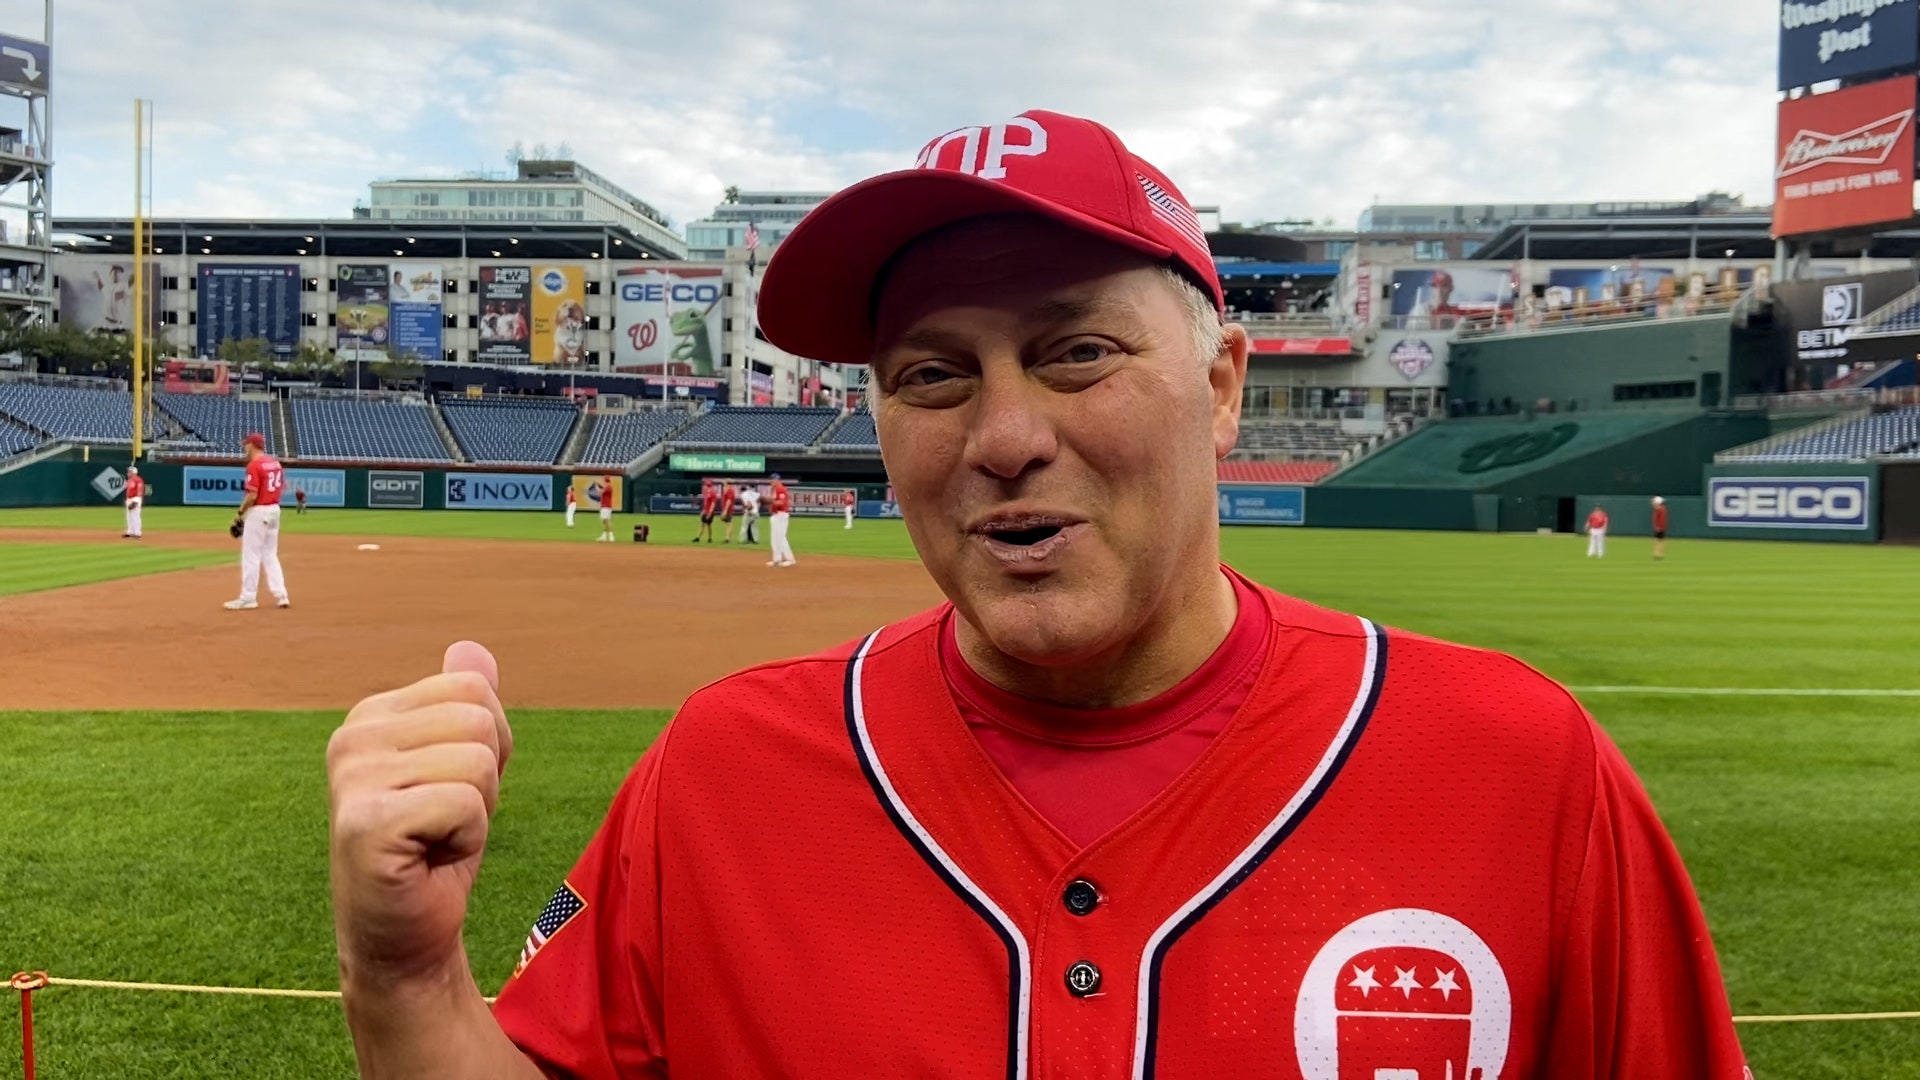 Congressional Baseball Game means something extra to Steve Scalise, 4 years after shooting